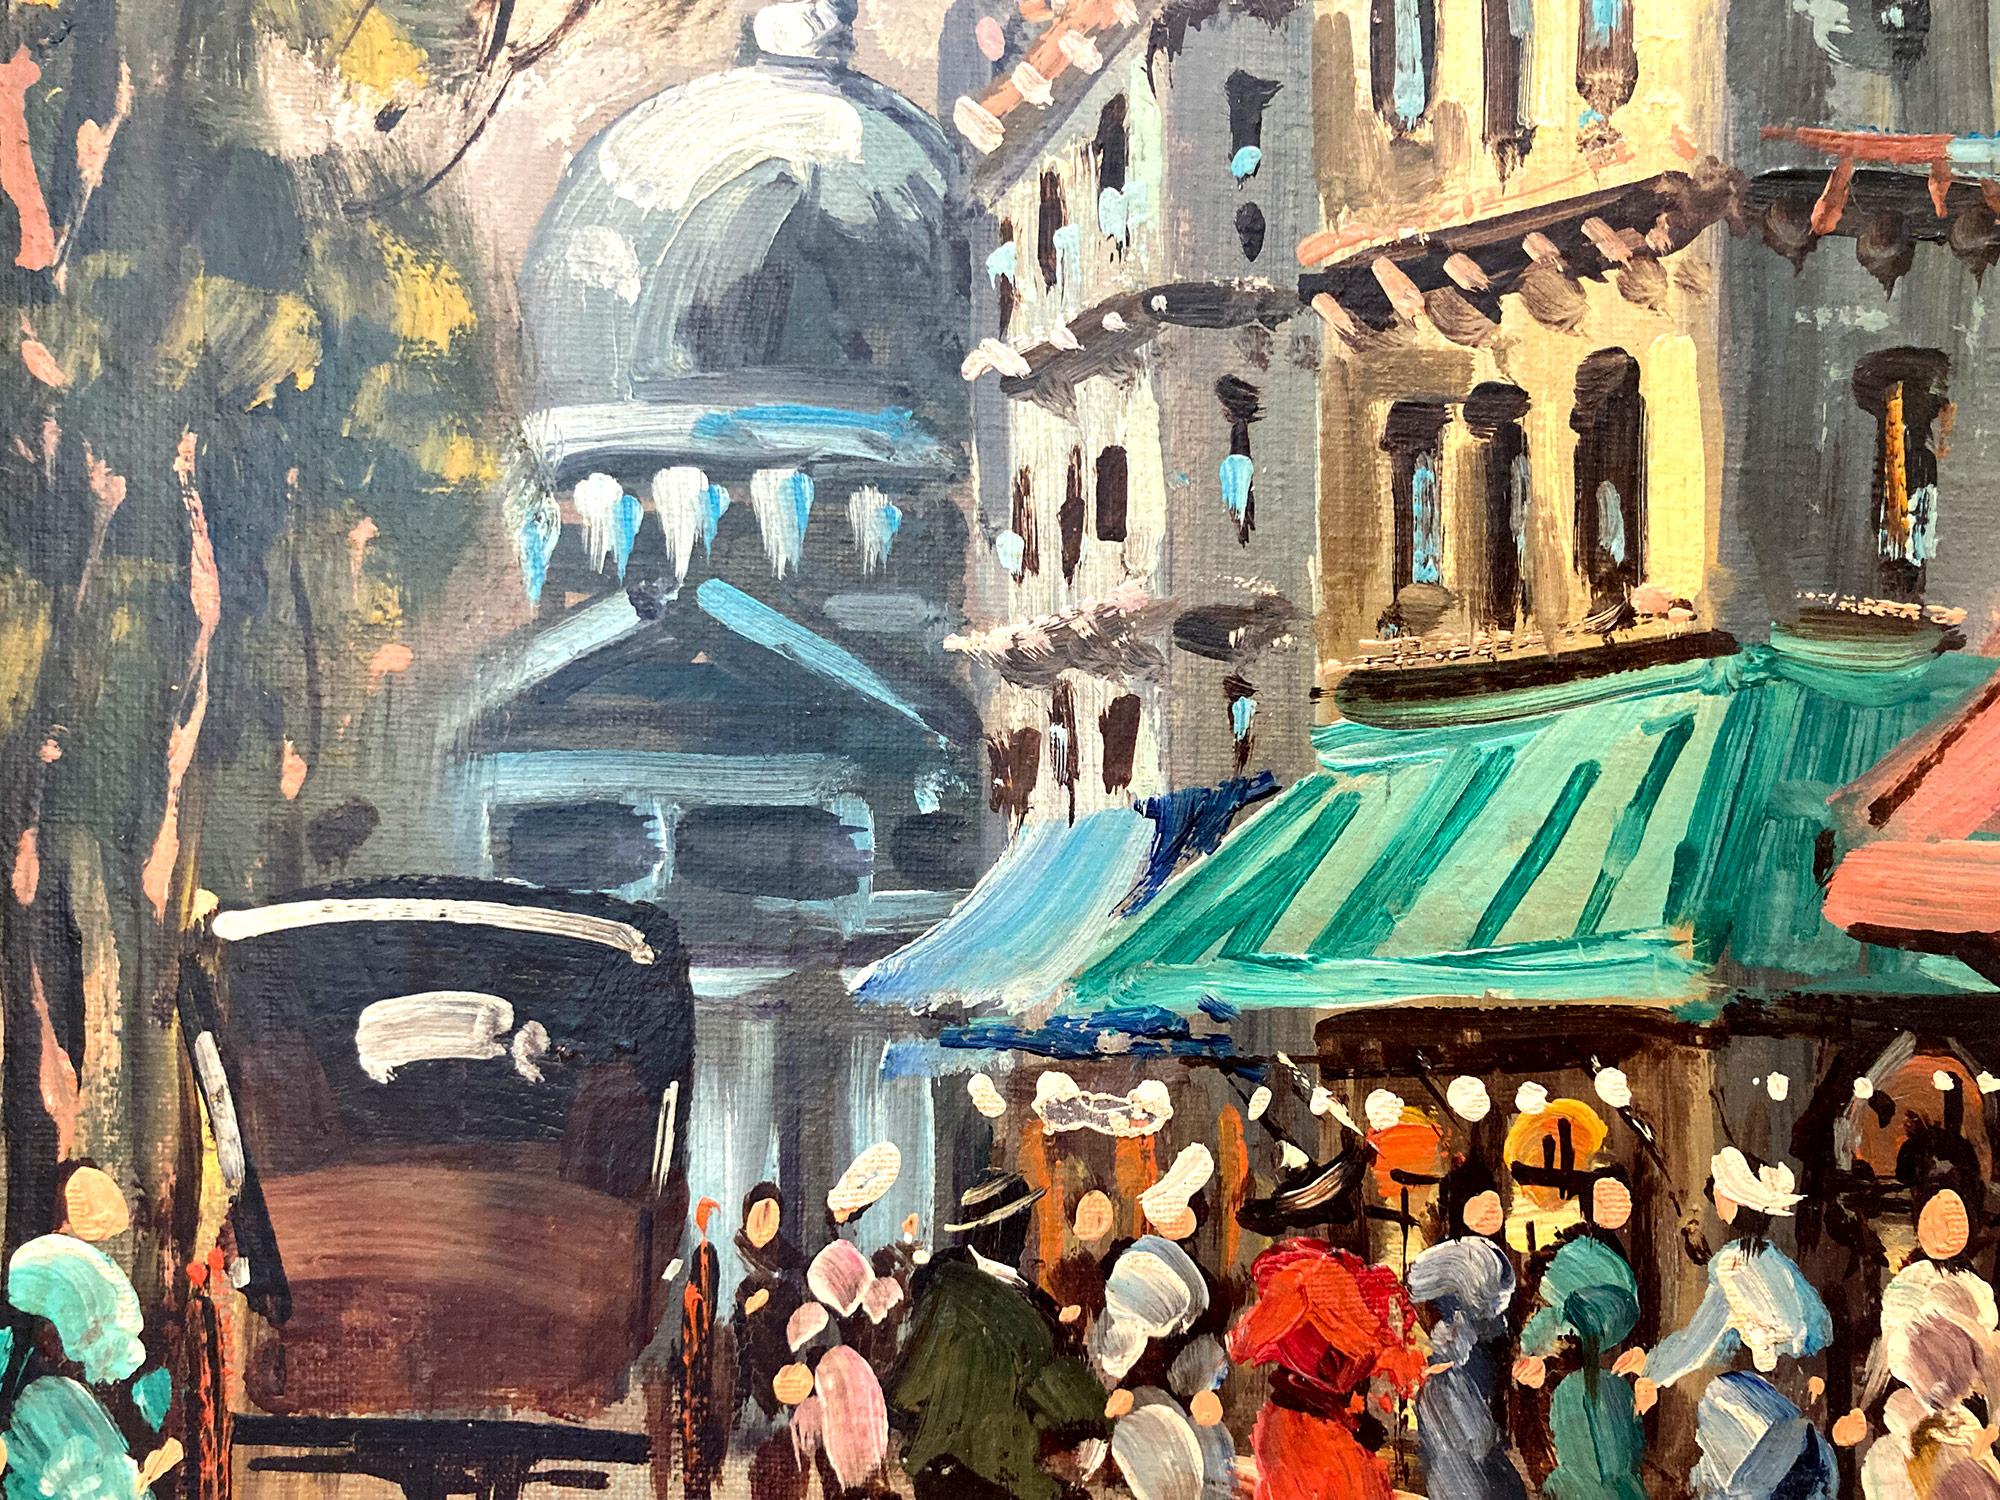 In this piece, the artist depicts his subject in a whimsical and impressionistic way, capturing the Cafés of the busy streets from the 20th Century with much life. In the distance we see Montmartre, it is primarily known for its artistic history,